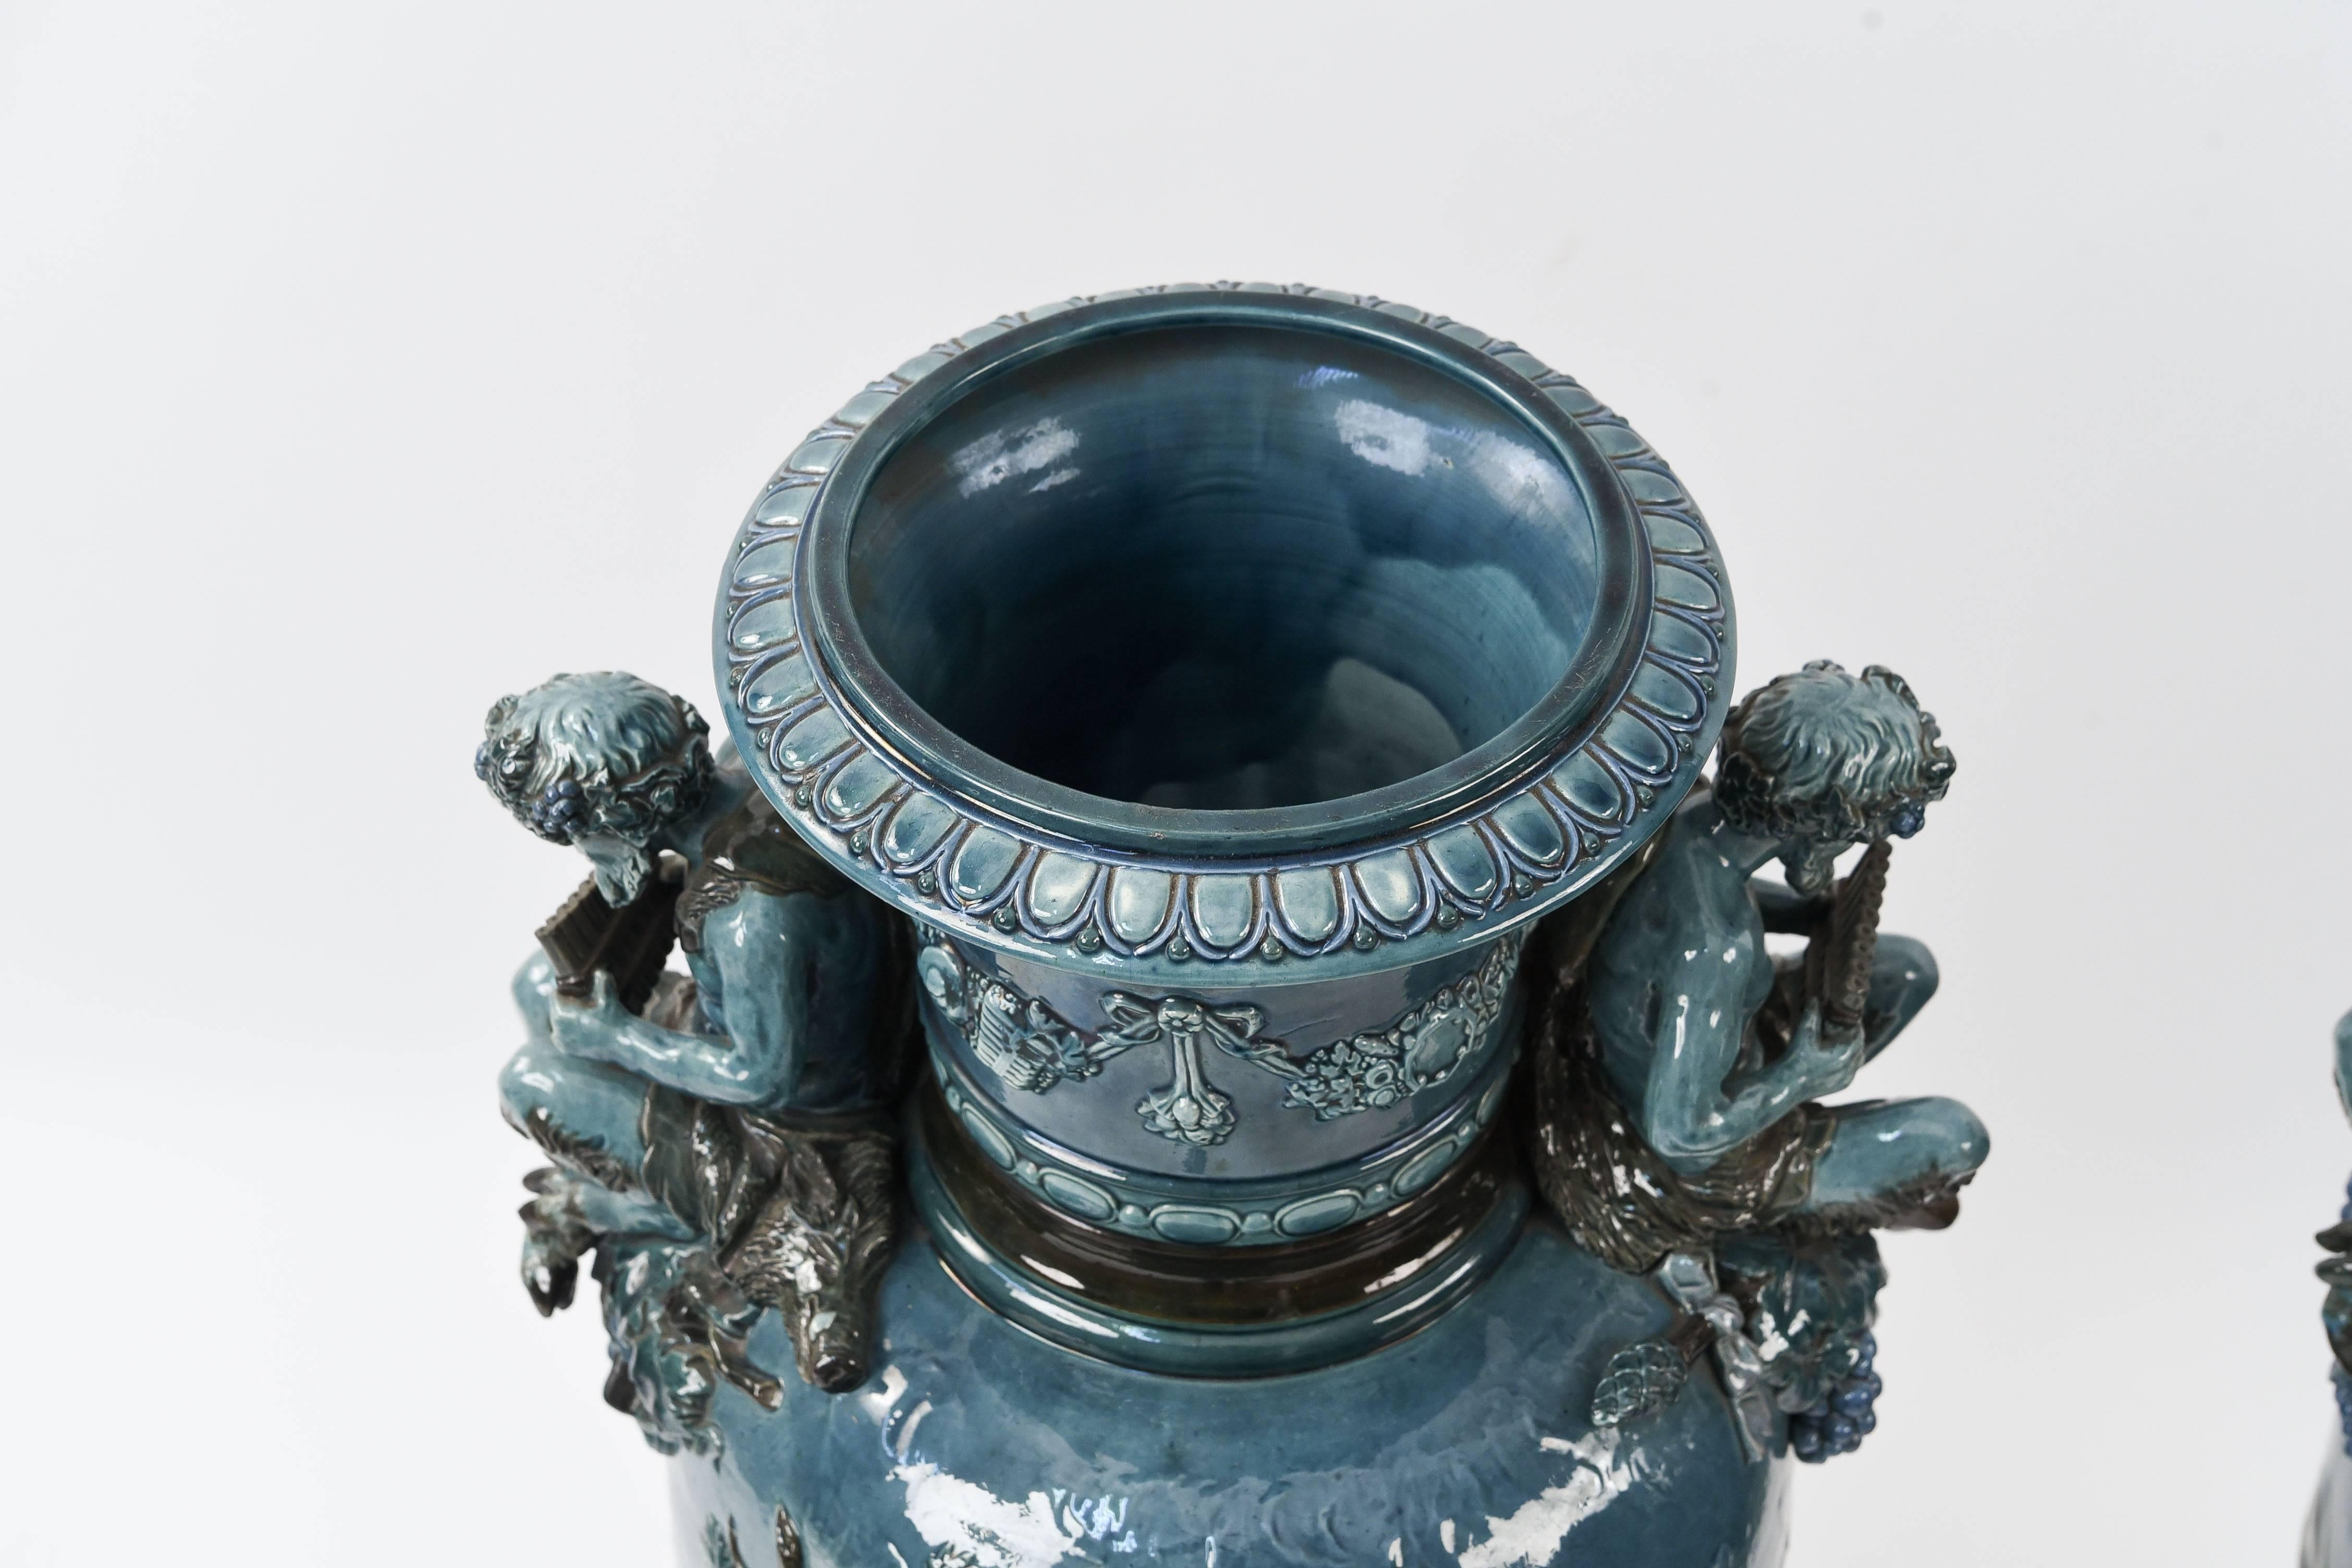 A wonderful, large pair of teal French majolica urns. Featuring two applied pan figures on each side of the openings, and a mother and child scene in relief on the bodies of the urns. The color and size make for a very striking pair.